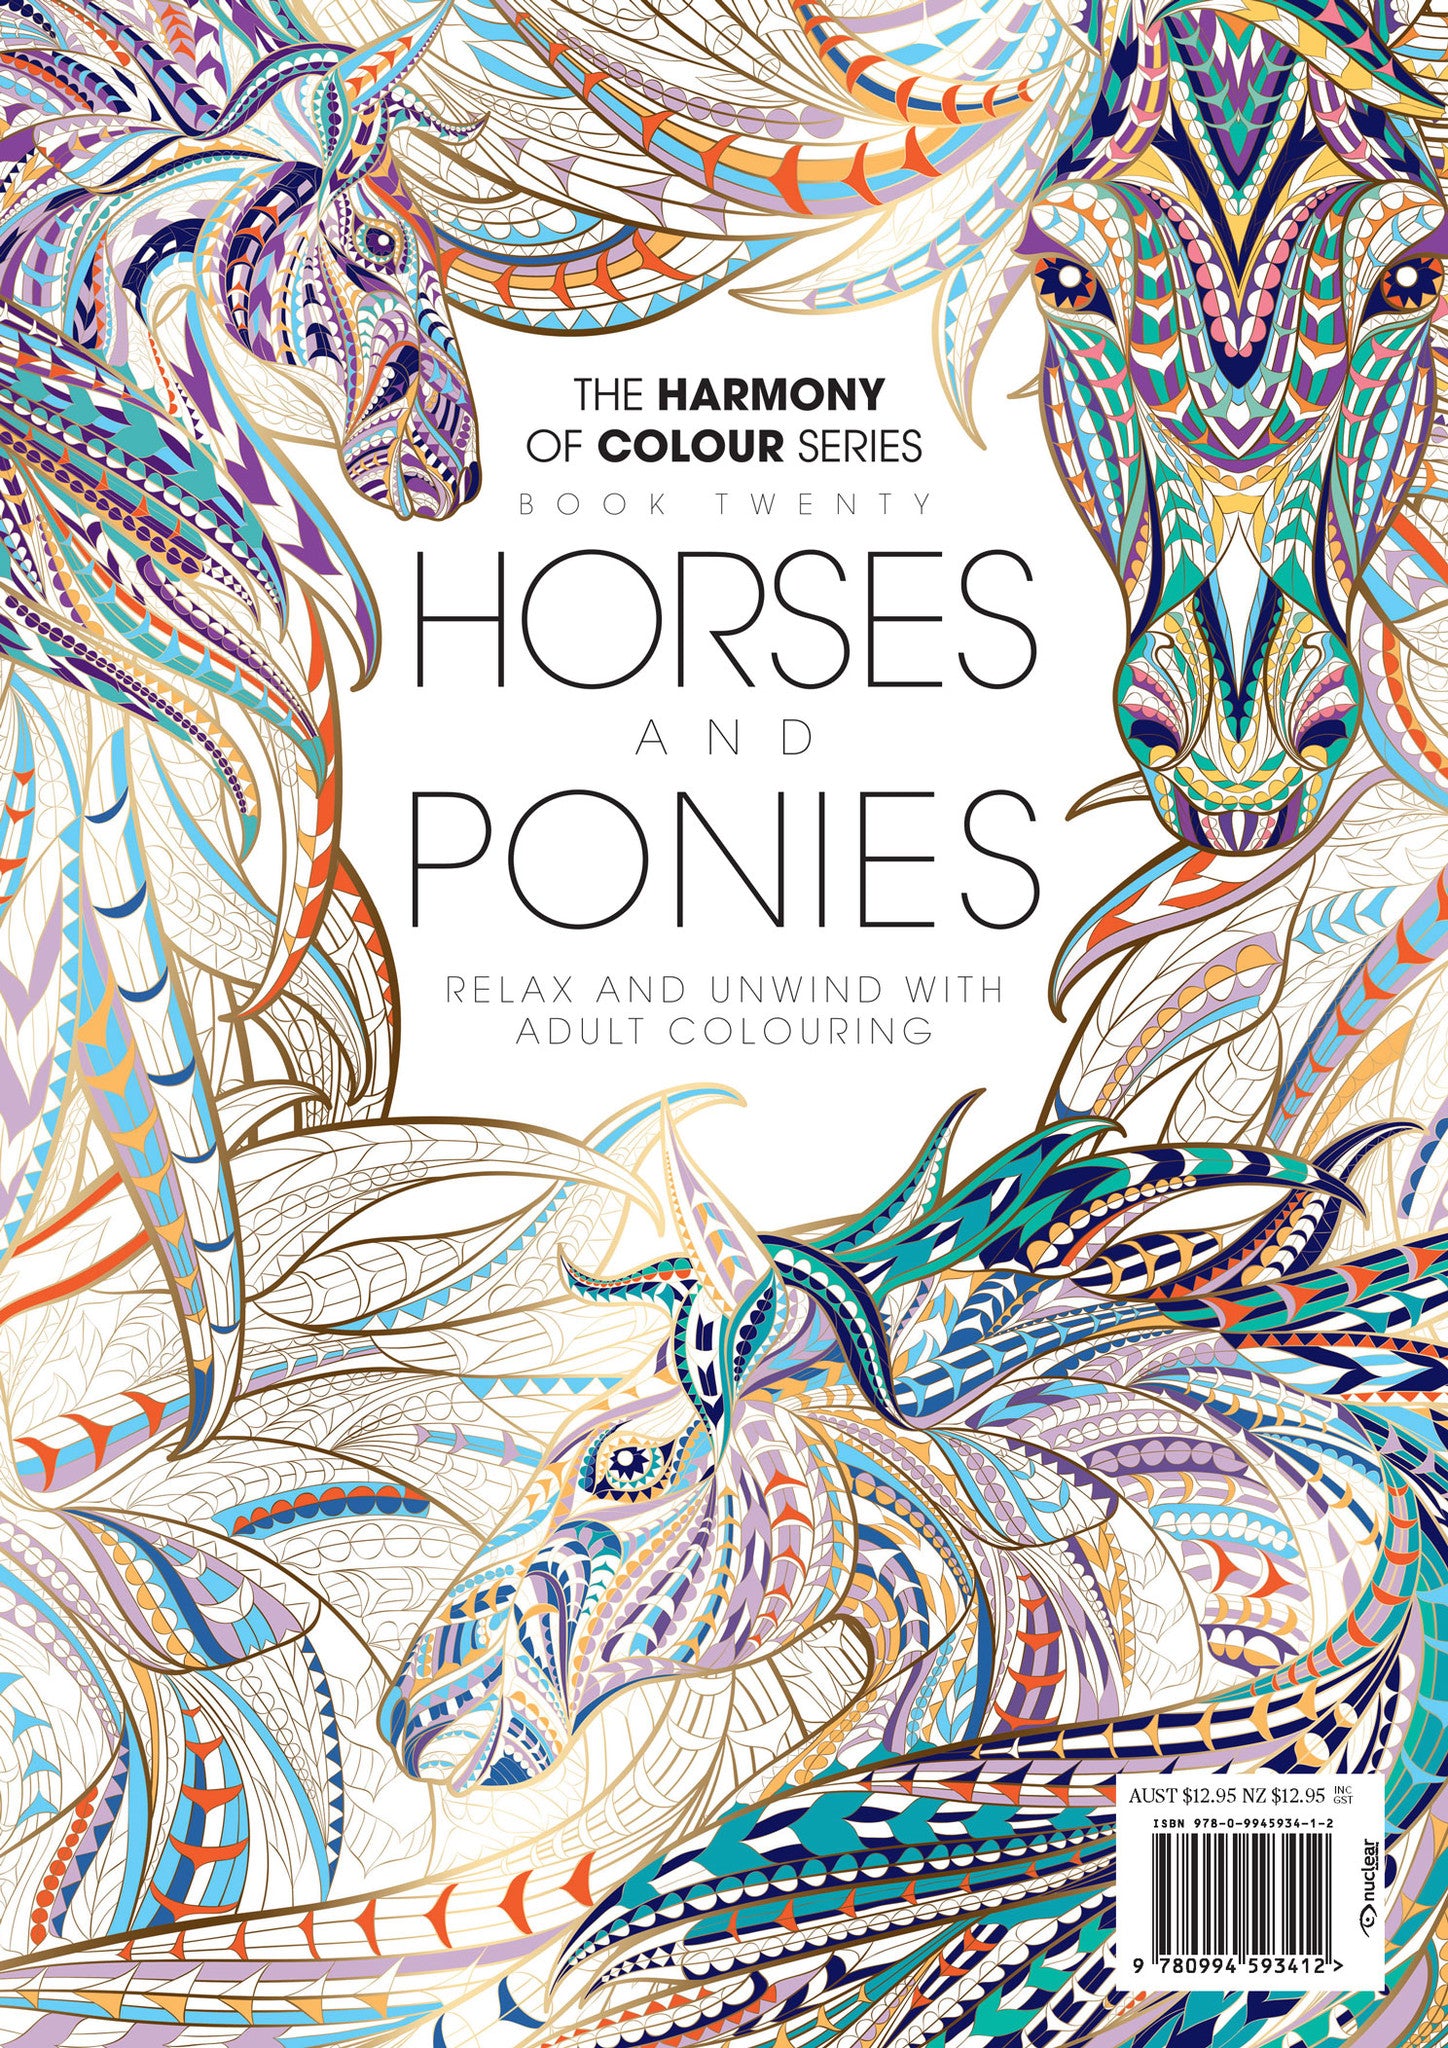 020. Harmony of Colour Book Twenty: Horses and Ponies (PRINTABLE DIGITAL EDITION AVAILABLE!)